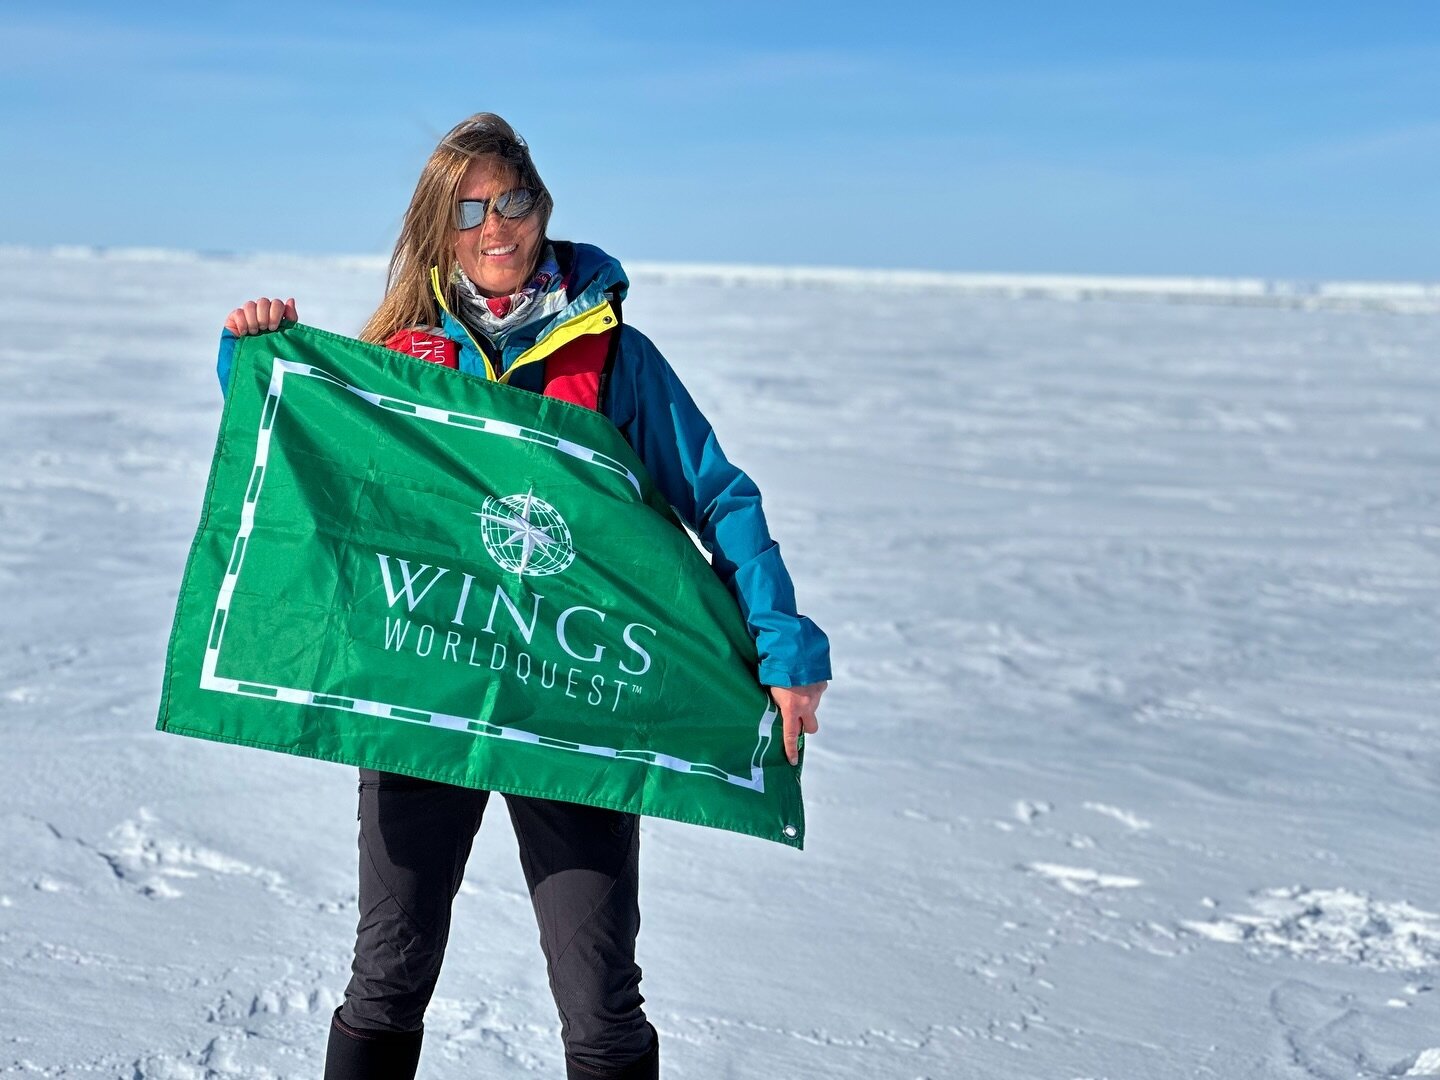 WINGS Flag Carrier Dr. Ulyana Horodyskyj Pena latest exploration was along the western coast of Antarctica. Ulyana travelled aboard Ponant&rsquo;s Le Commandant Charcot, an icebreaker designed to reach some of the most remote places on Earth.

🌏🌎🌍